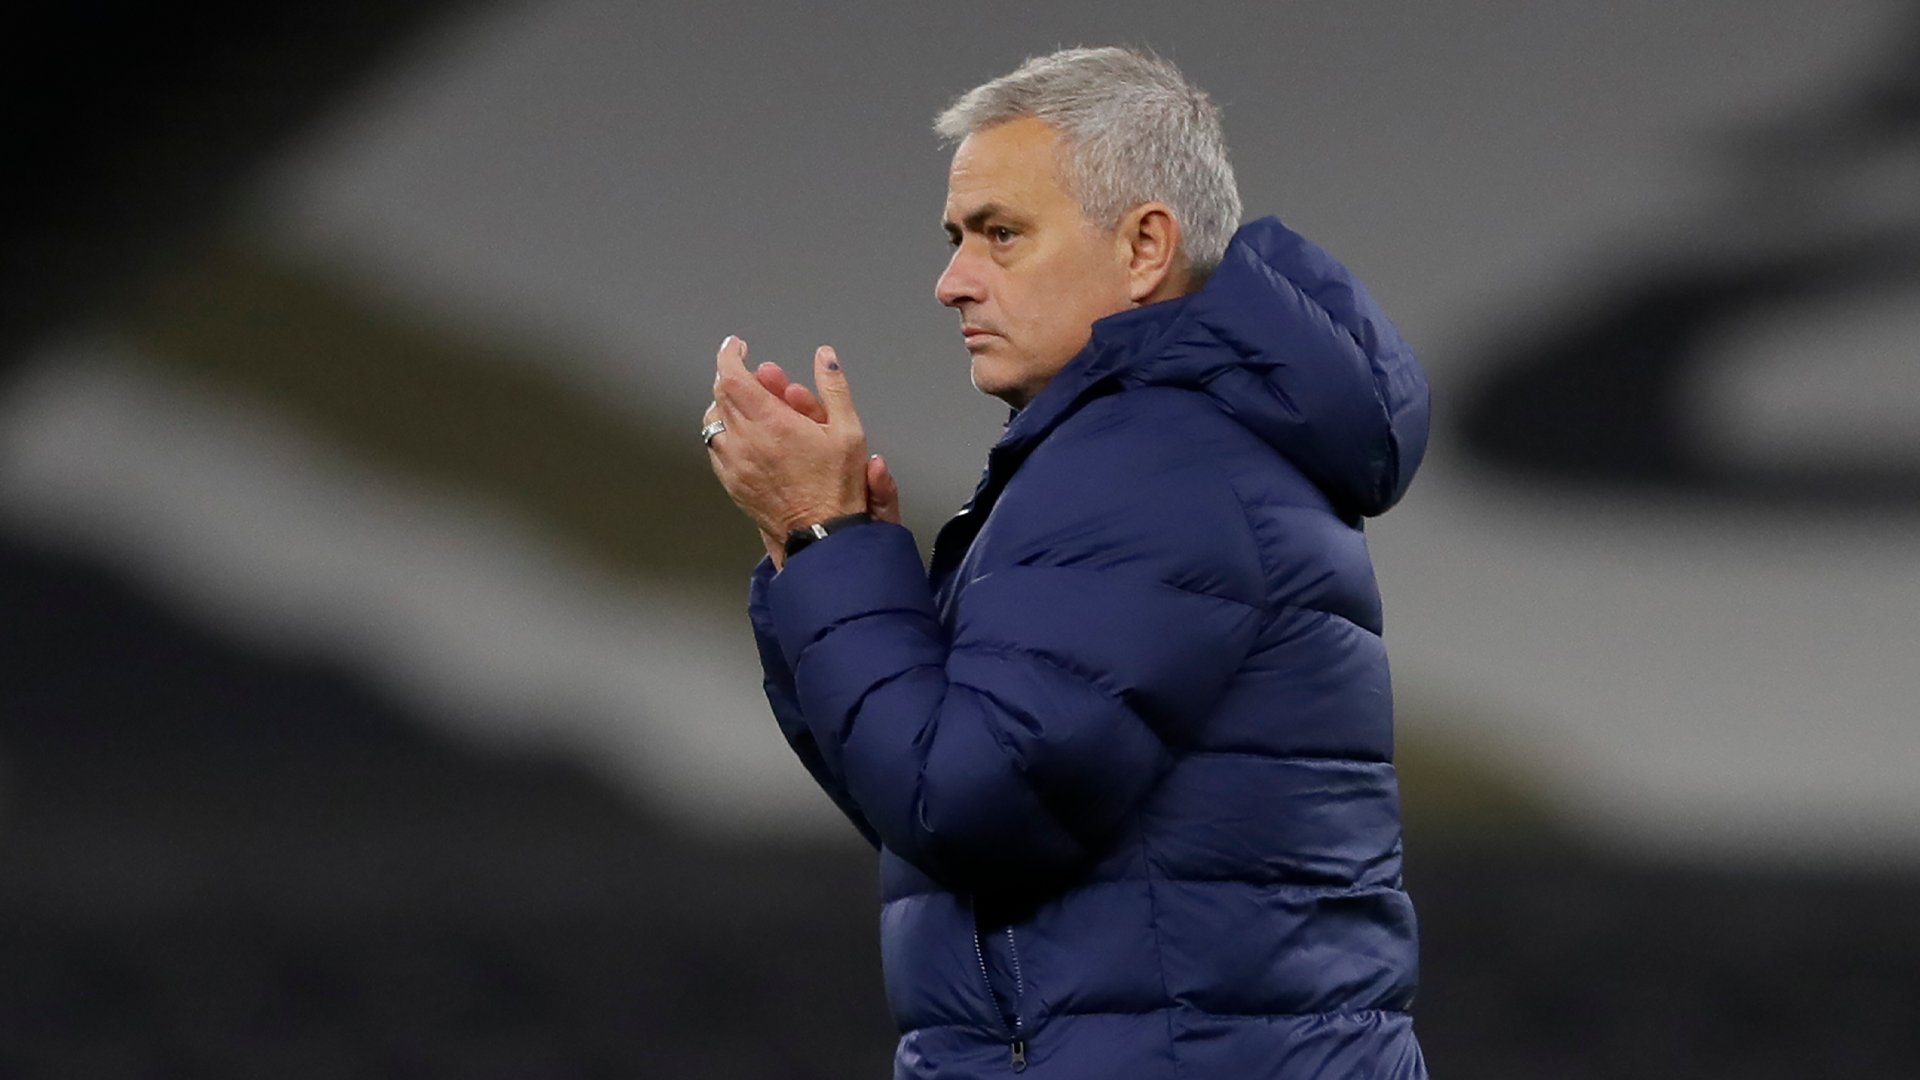 Impossible to keep every player in the squad happy with their game-time, admits Jose Mourinho